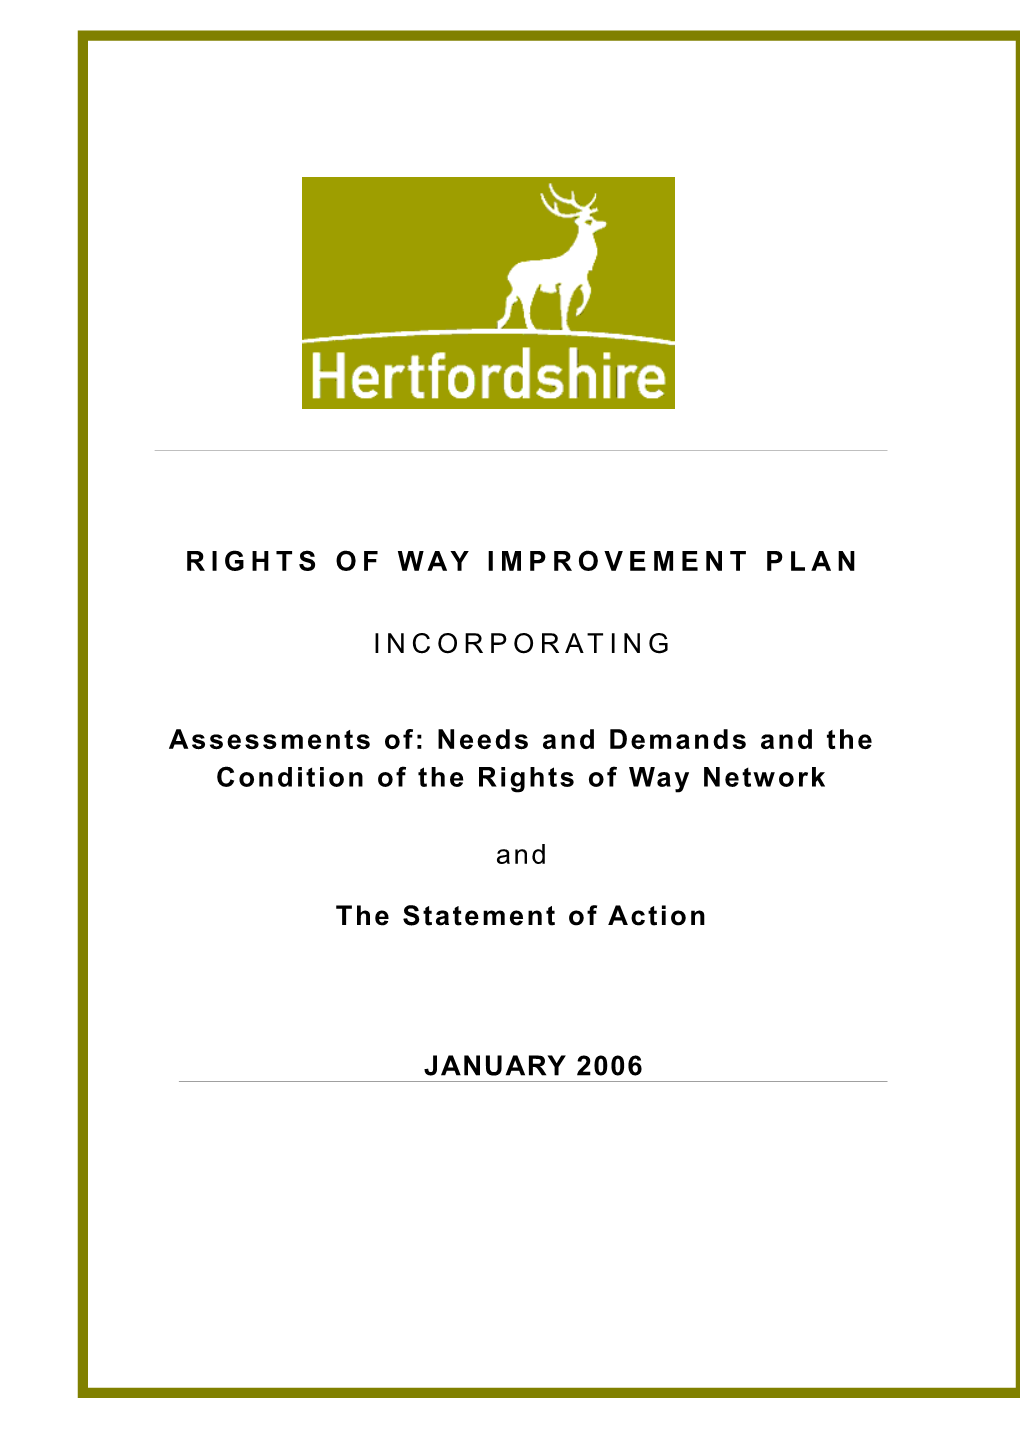 RIGHTS of WAY IMPROVEMENT Plan